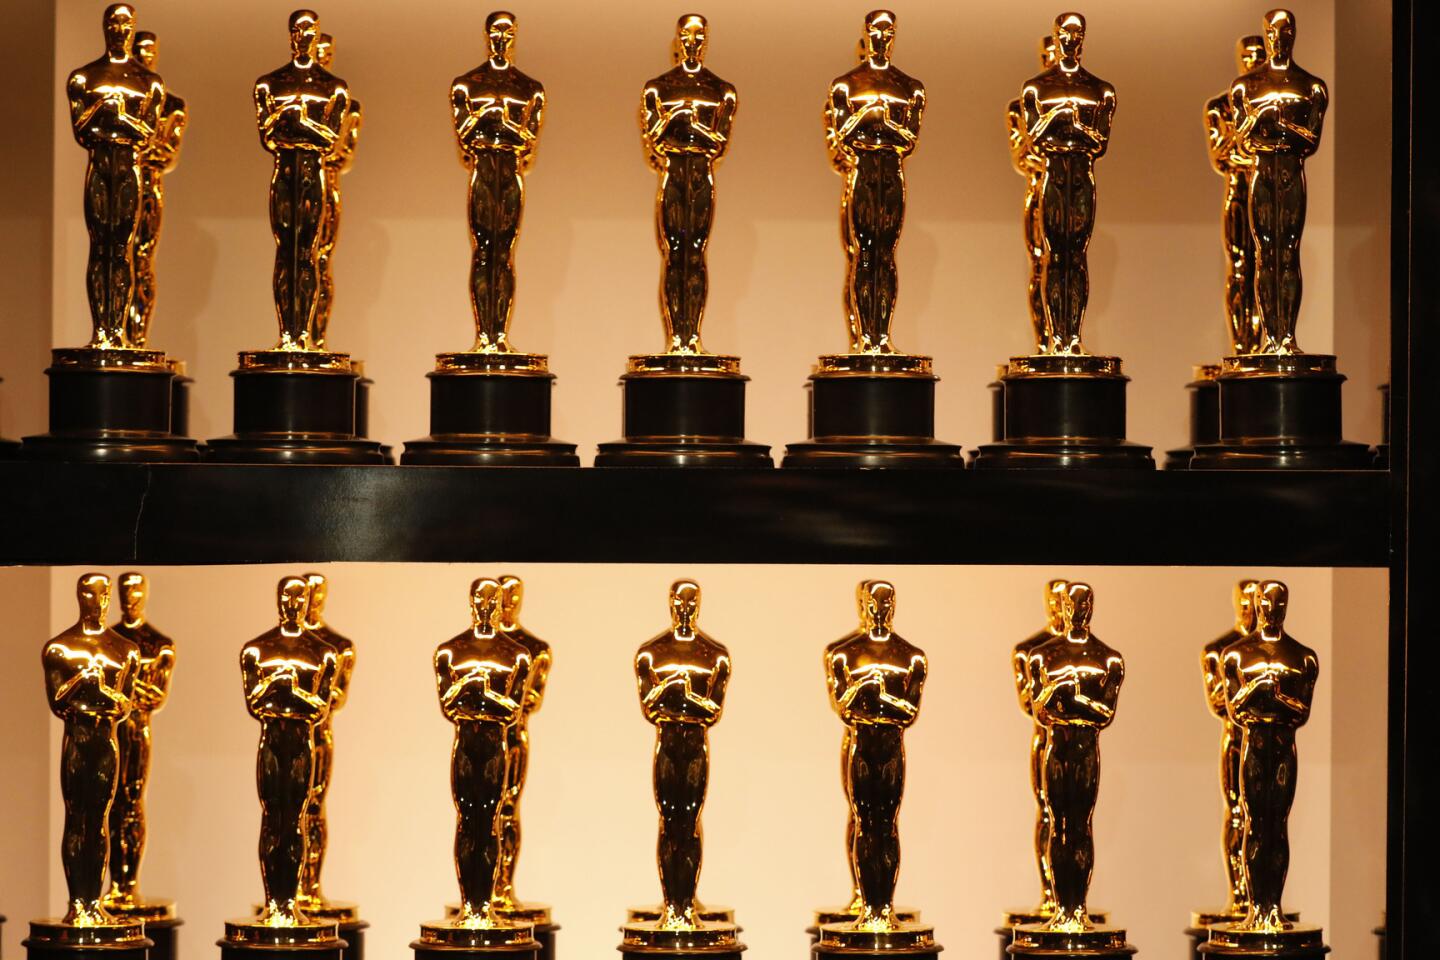 Oscar statues backstage at the 90th Academy Awards on Sunday at the Dolby Theatre in Hollywood.